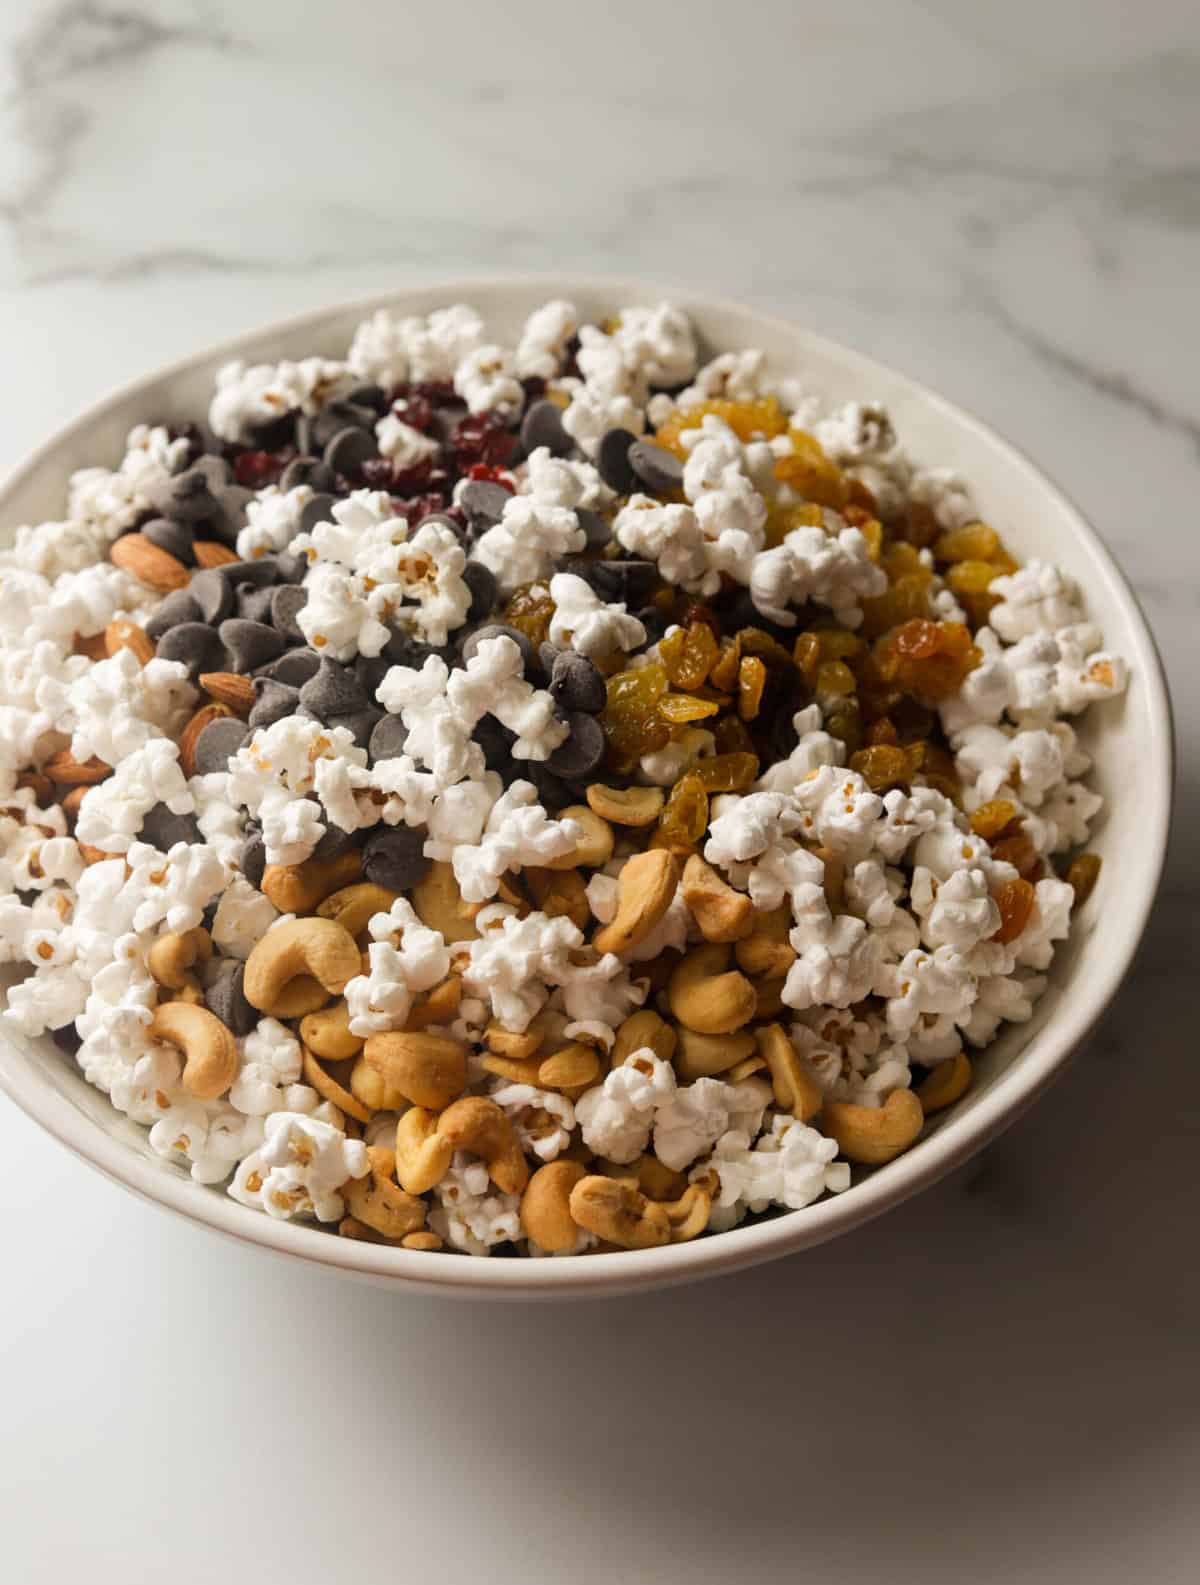 A side shot of a bowl filled with popcorn trail mix.